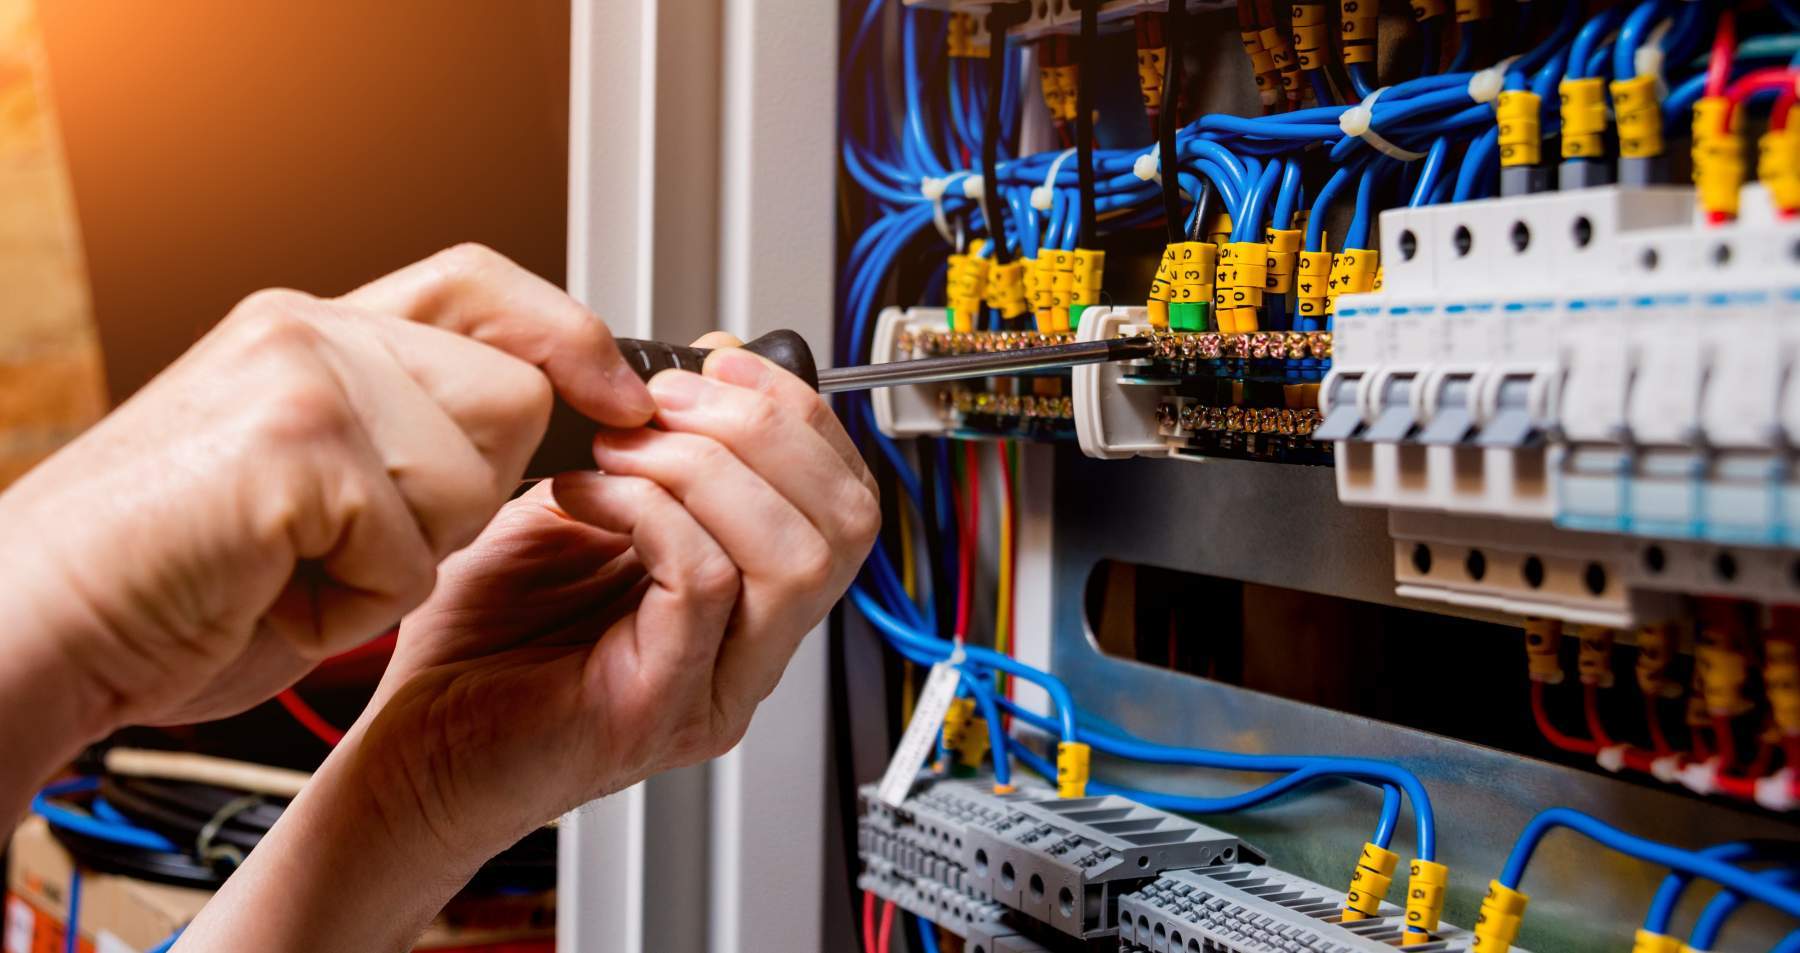 Hiring An Electrician Over Doing It Yourself Has Several Benefits